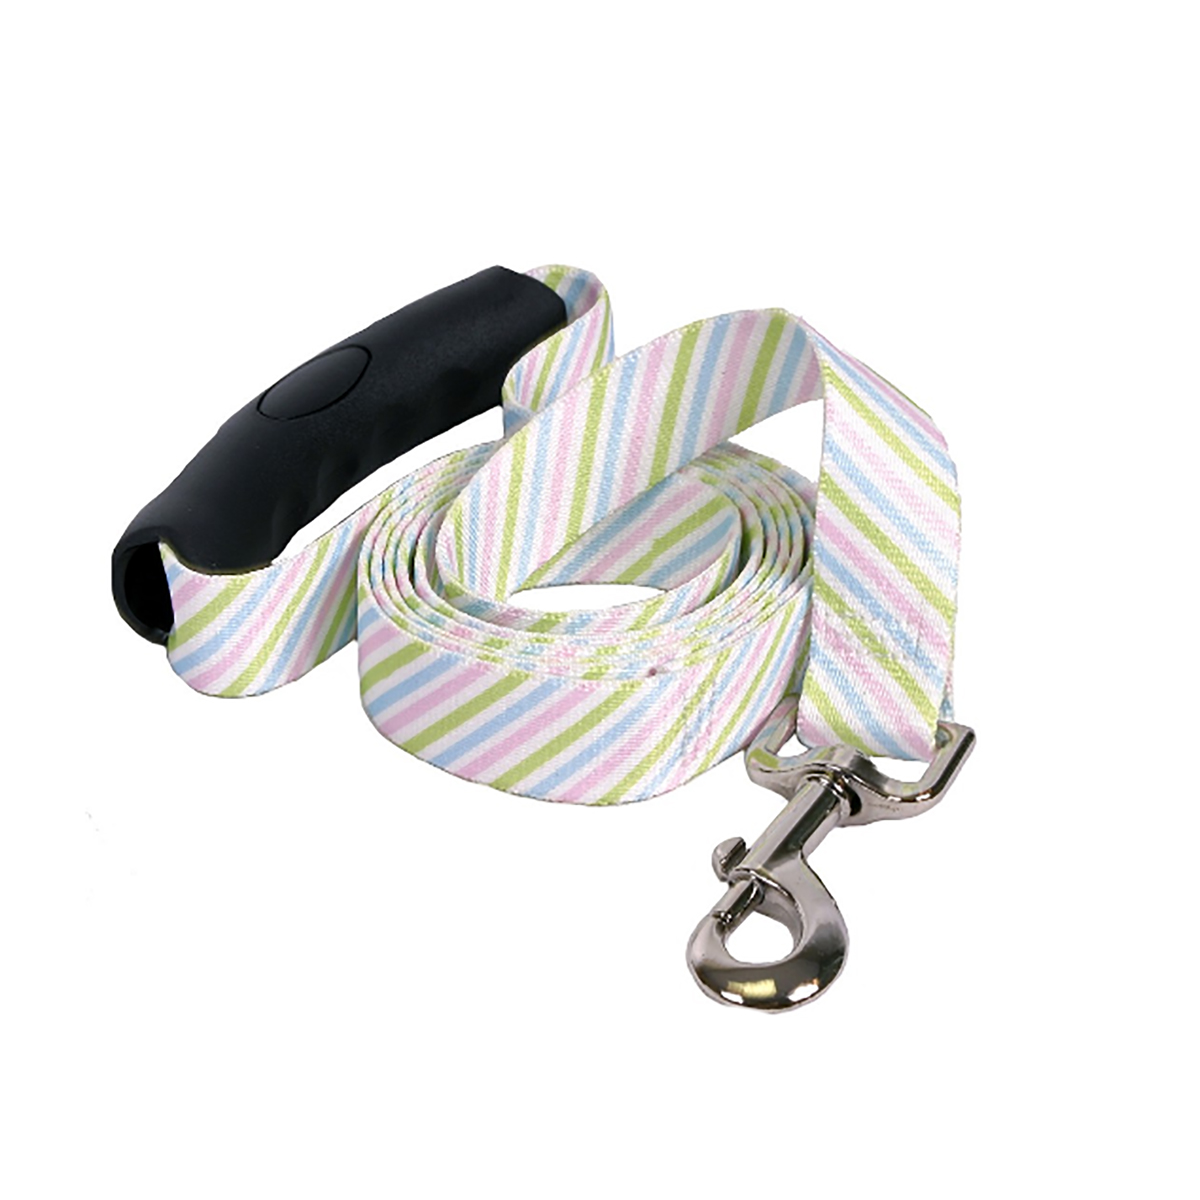 Southern Dawg Seersucker EZ-Grip Dog Leash by Yellow Dog - Pink, Blue and Green